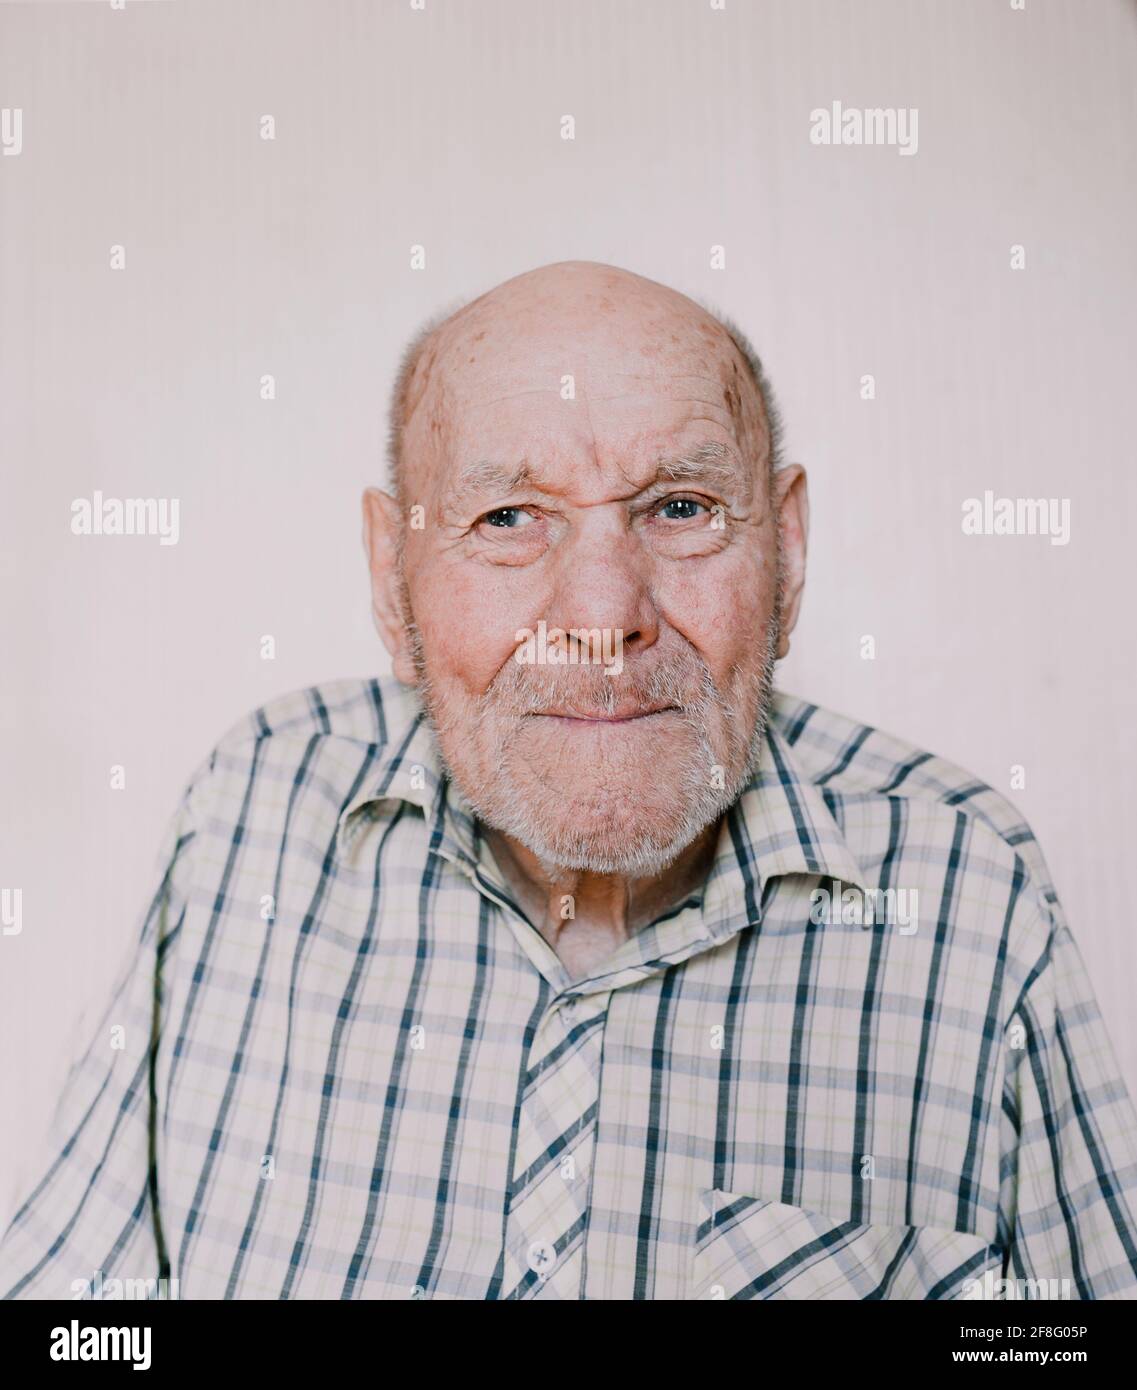 a large portrait of an old man on a light background with deep wrinkles, age spots. Stock Photo